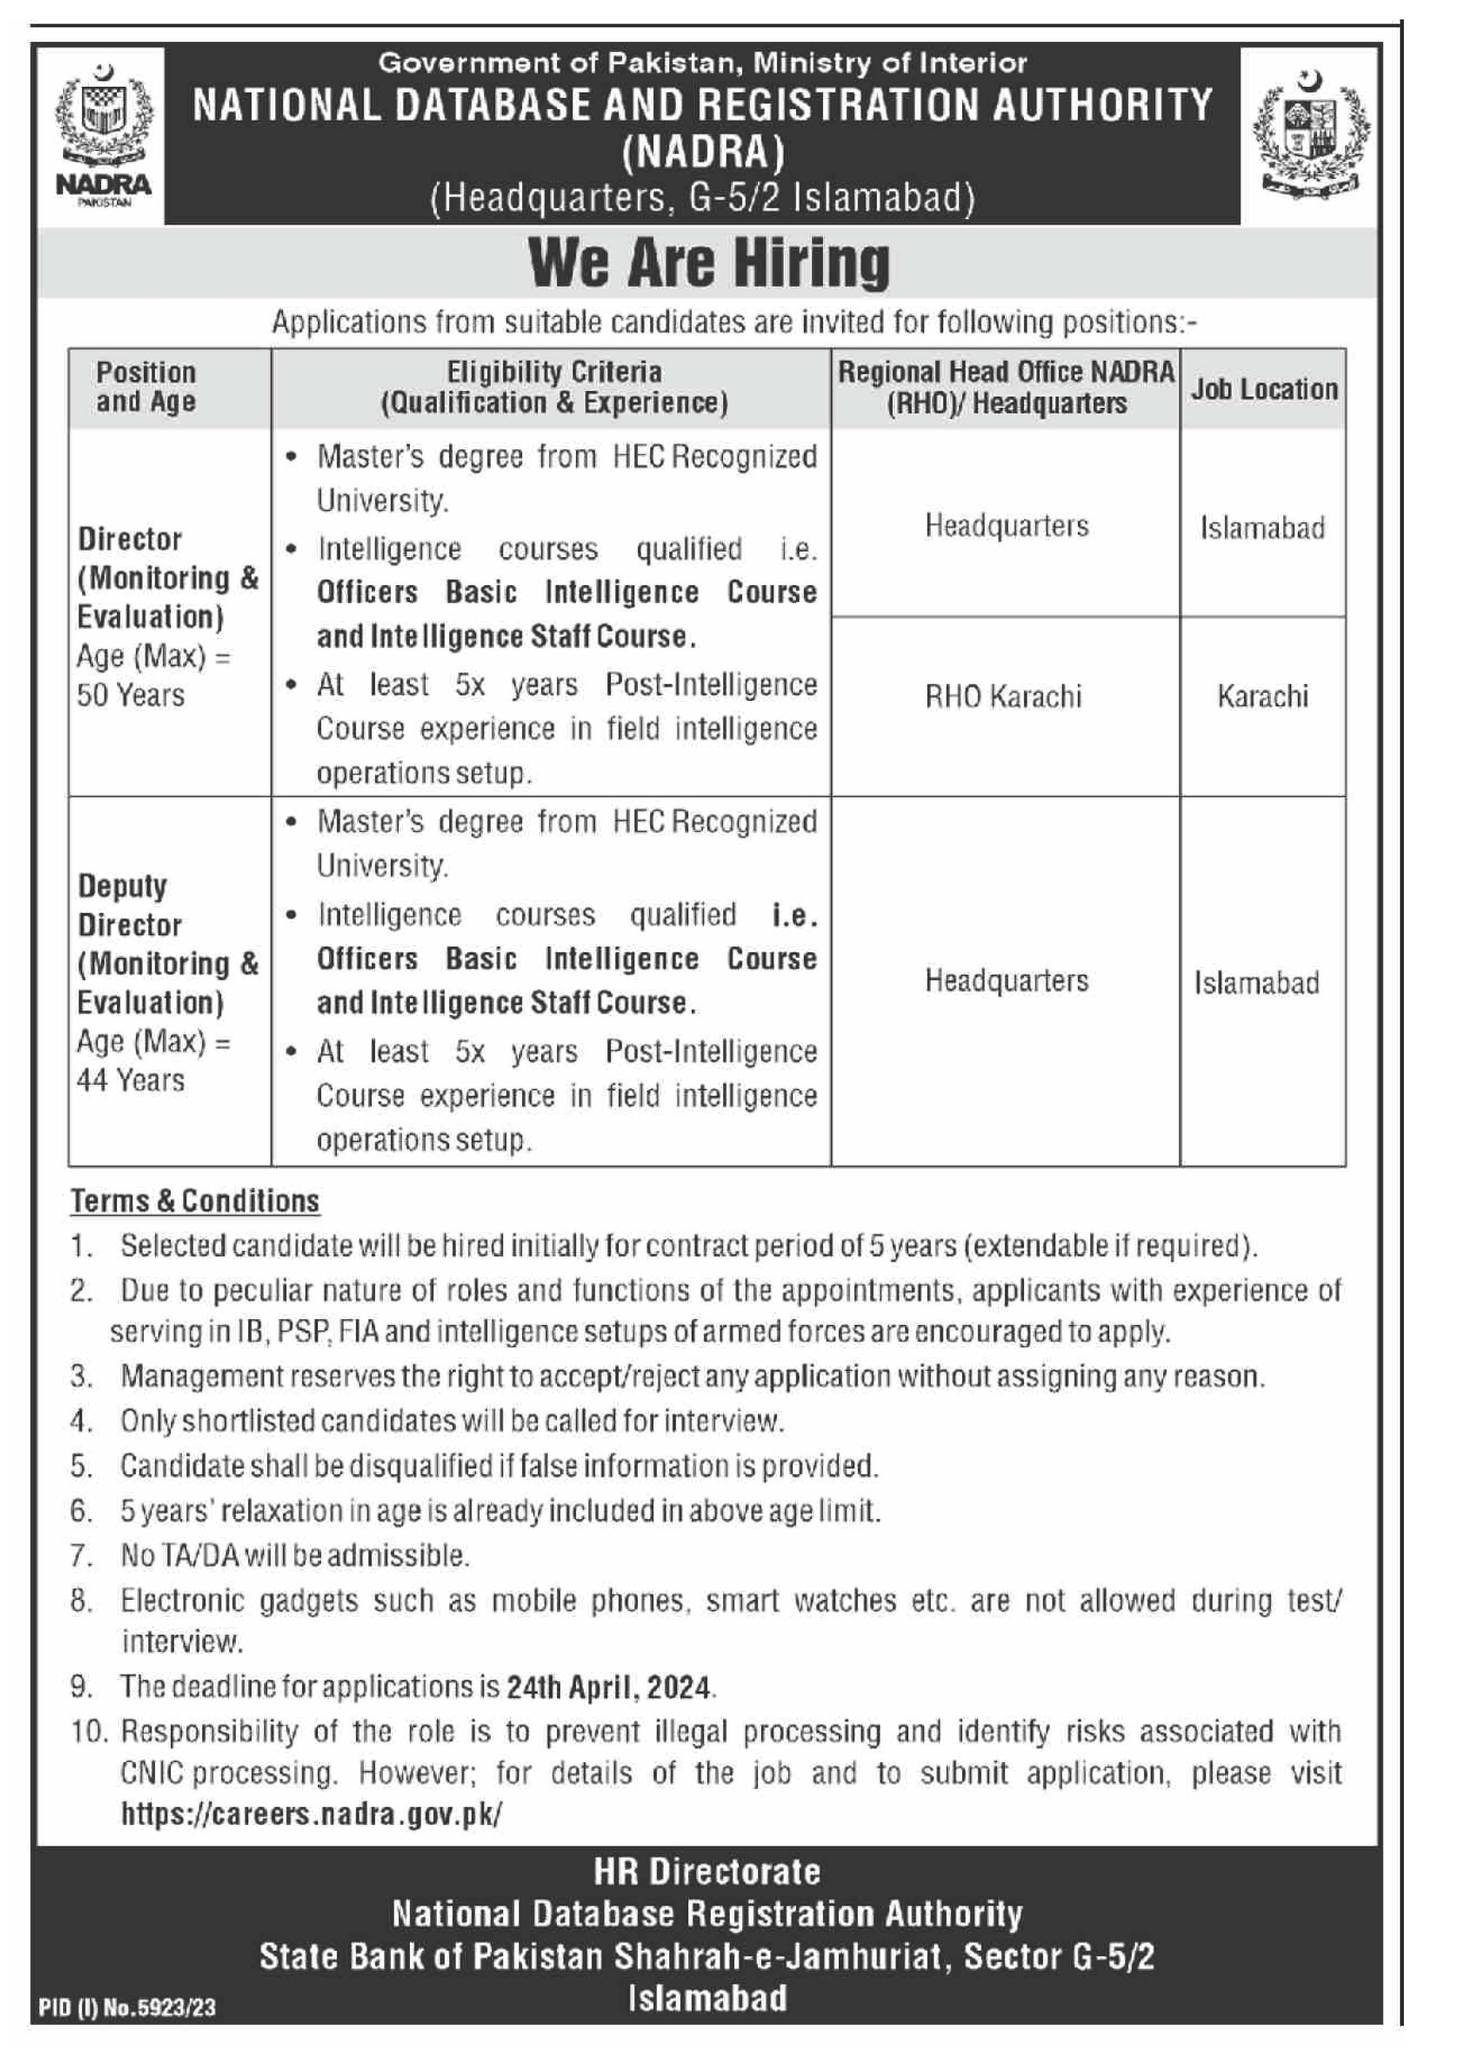 National Database and Registration Authority (NADRA) Jobs April 2024